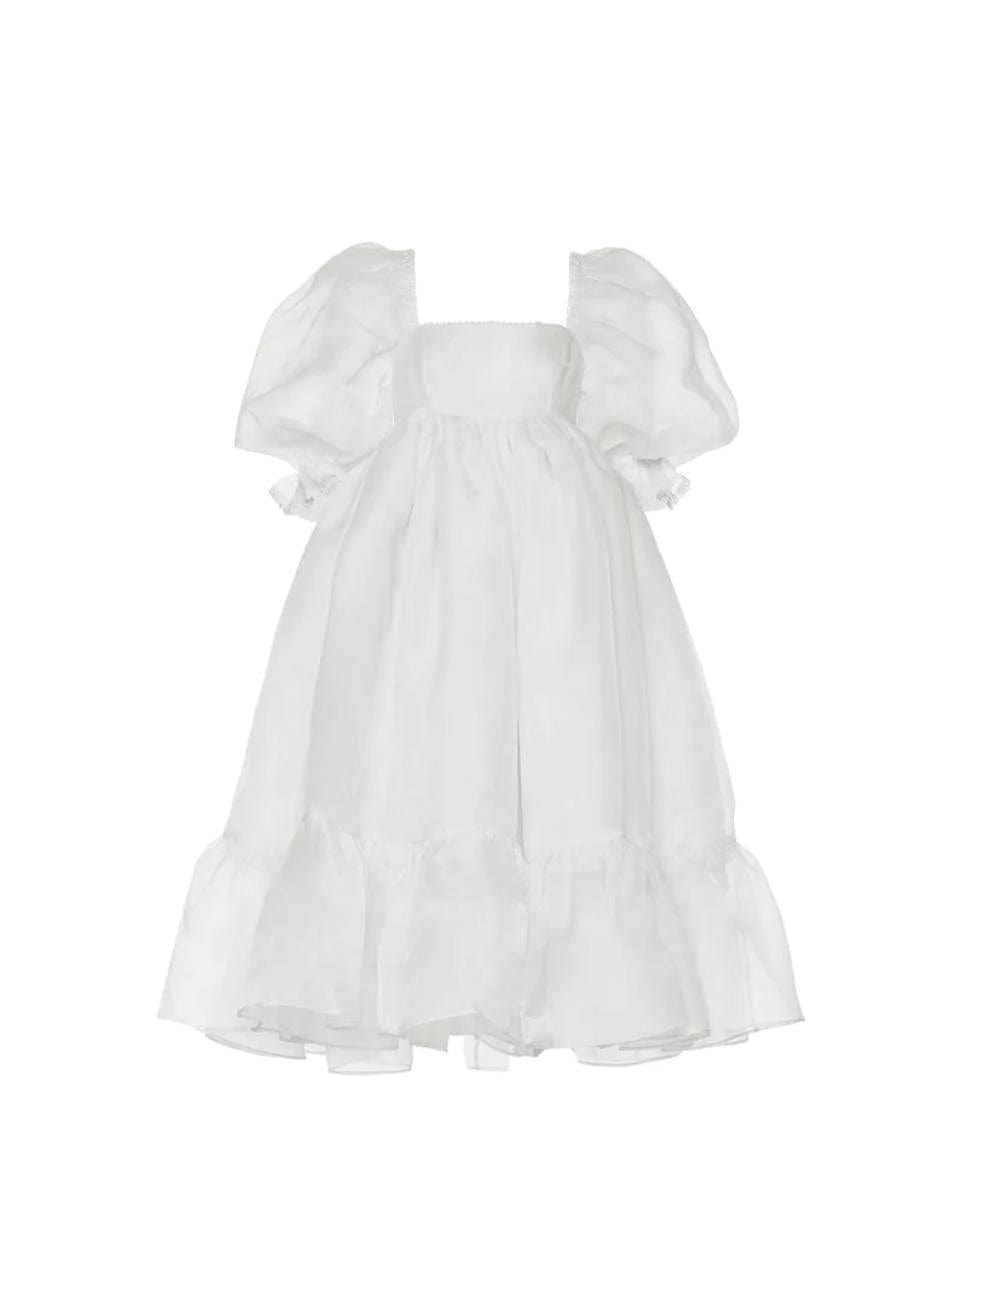 The Ivory French Puff Dress in White